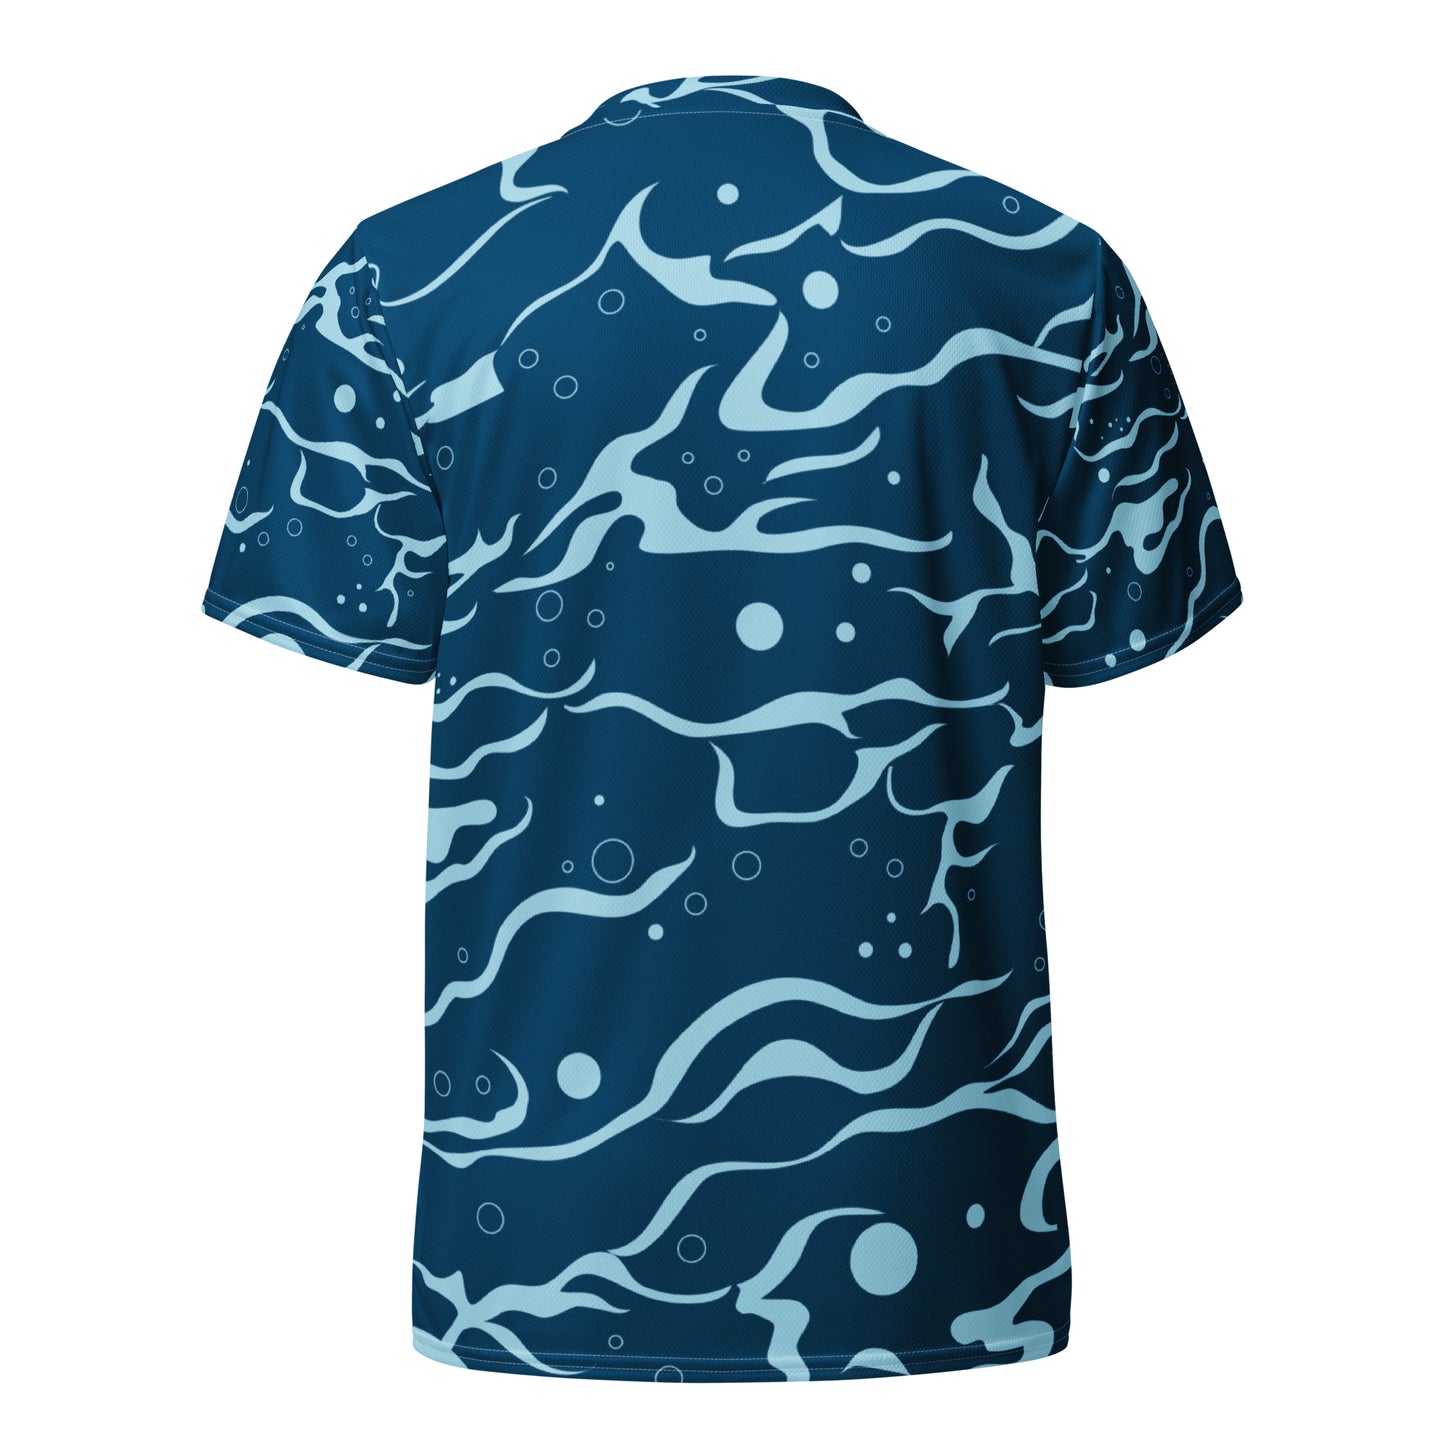 Killer Whale, recycled sports t-shirt